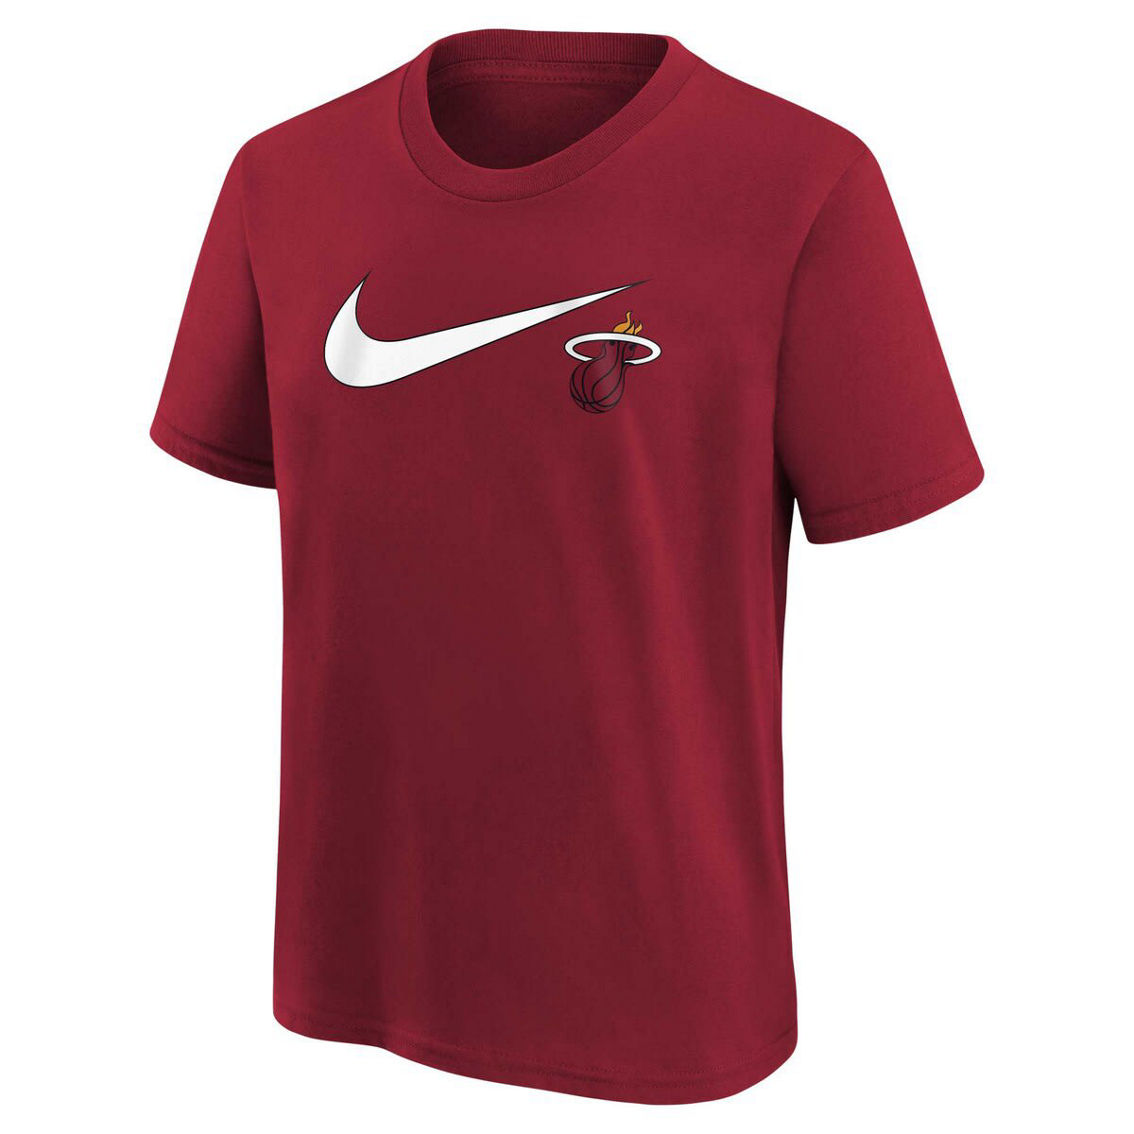 Nike Youth Red Miami Heat Swoosh T-Shirt - Image 3 of 4